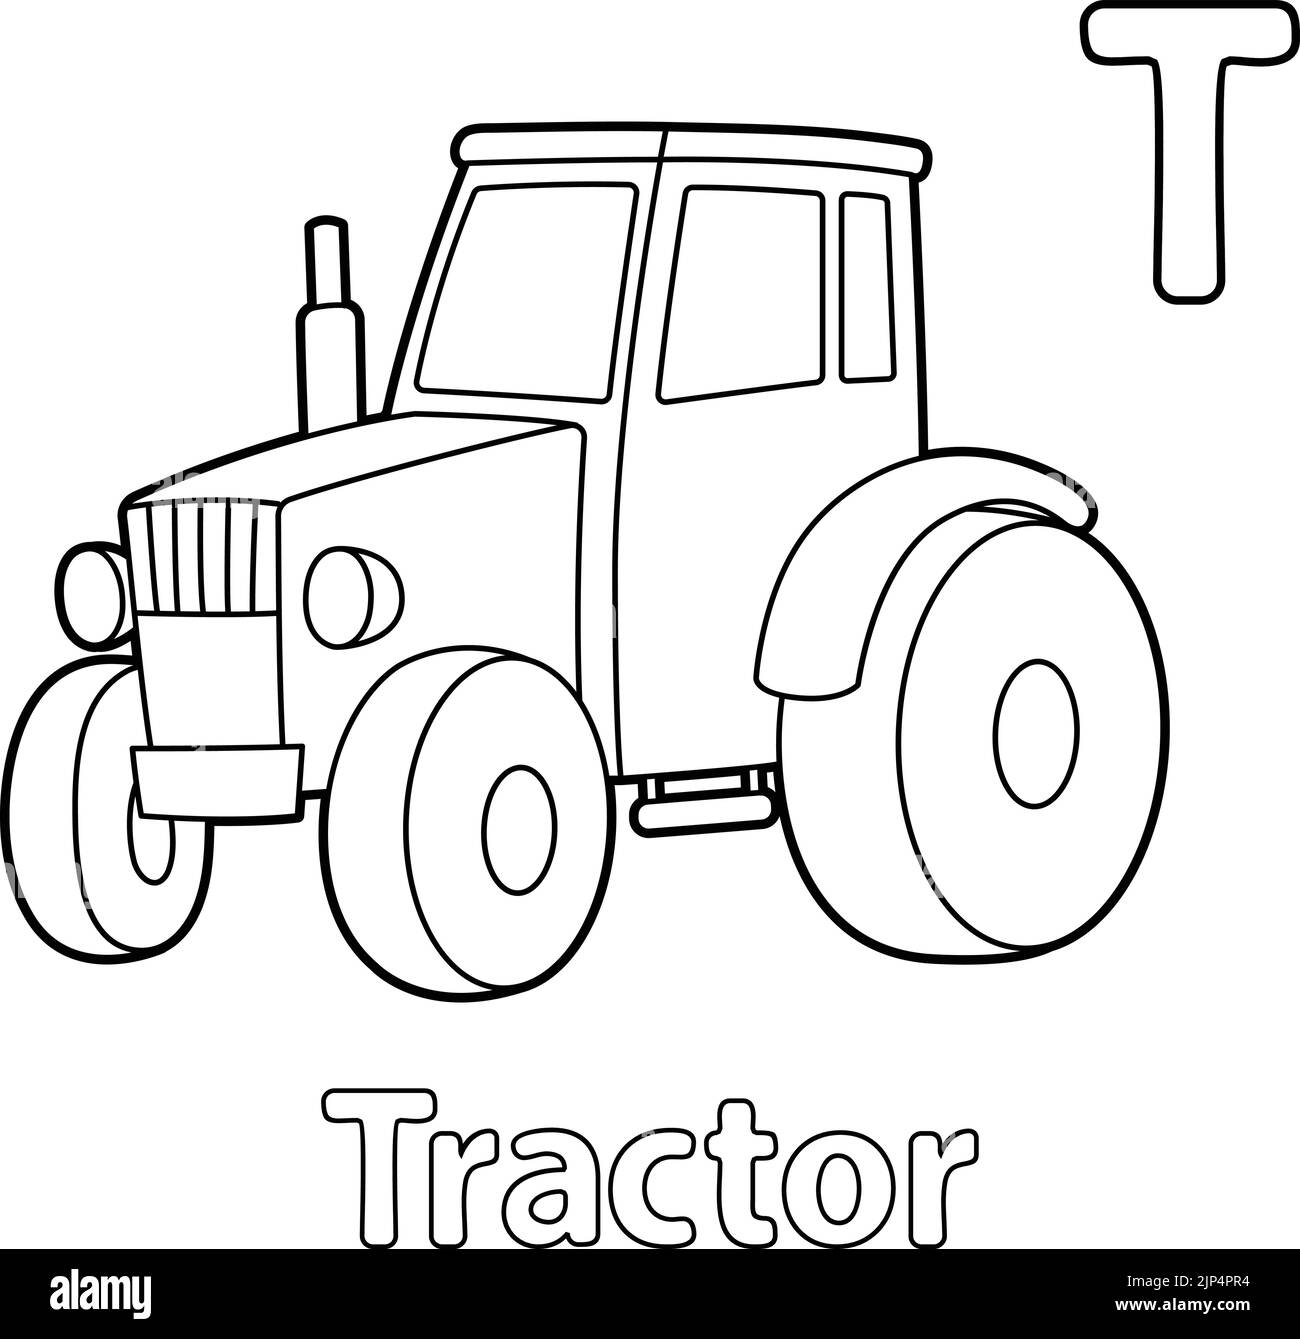 Tractor Alphabet ABC Coloring Page T Stock Vector